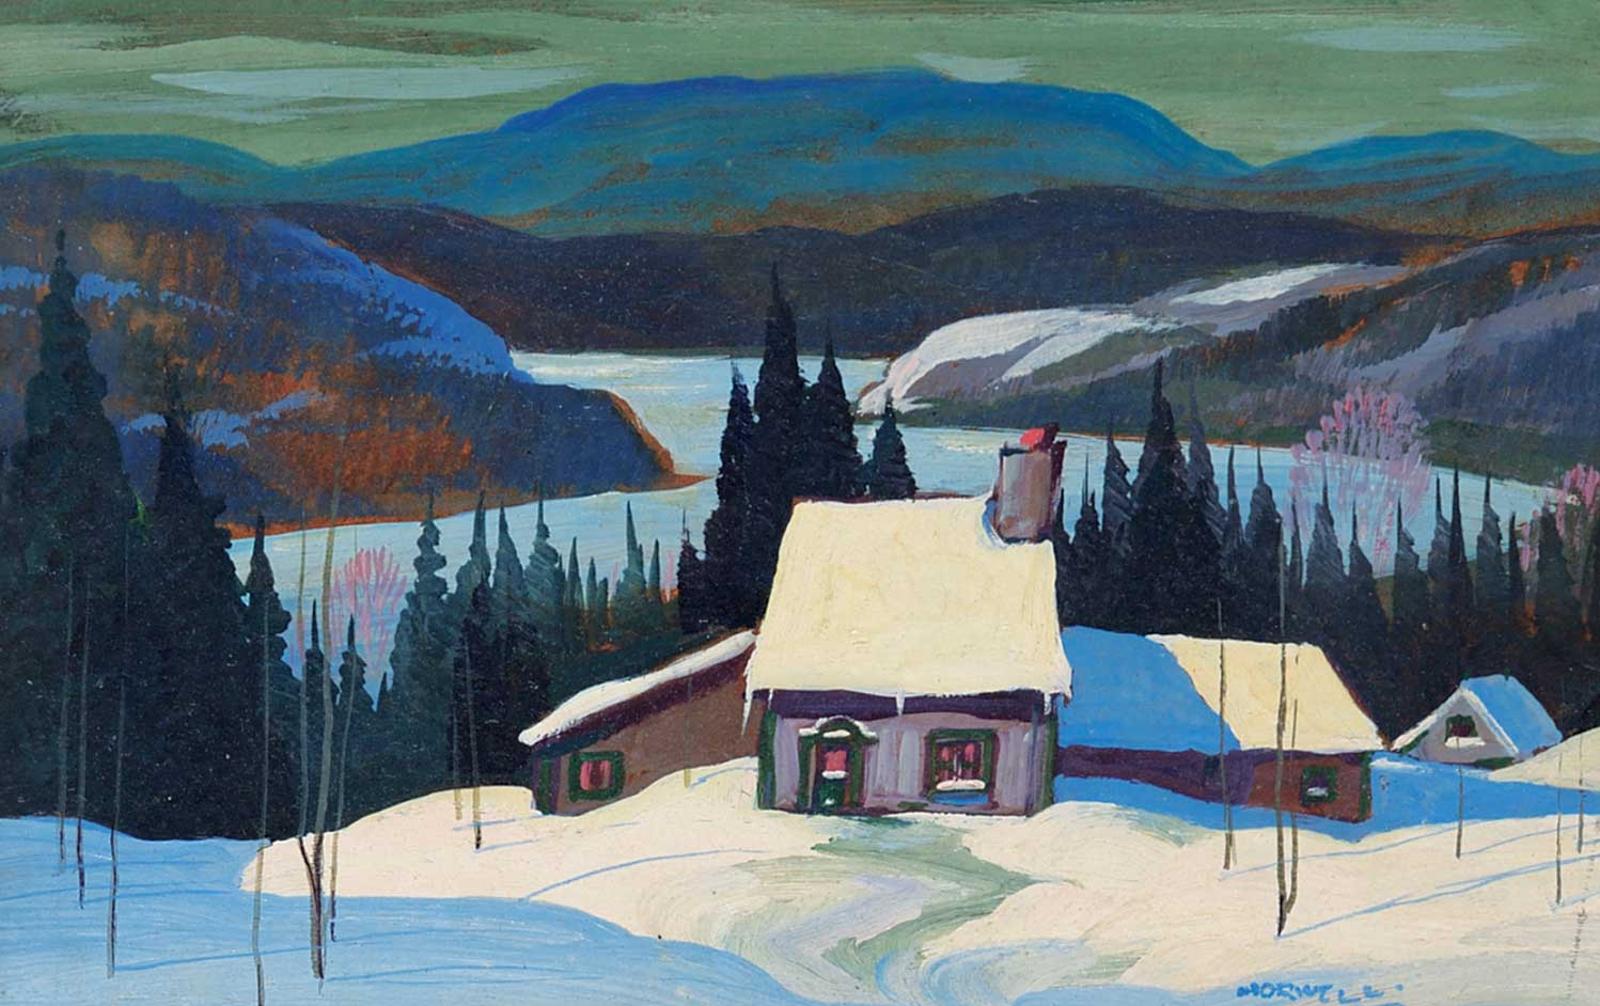 Graham Norble Norwell (1901-1967) - Untitled - Winter Cabin